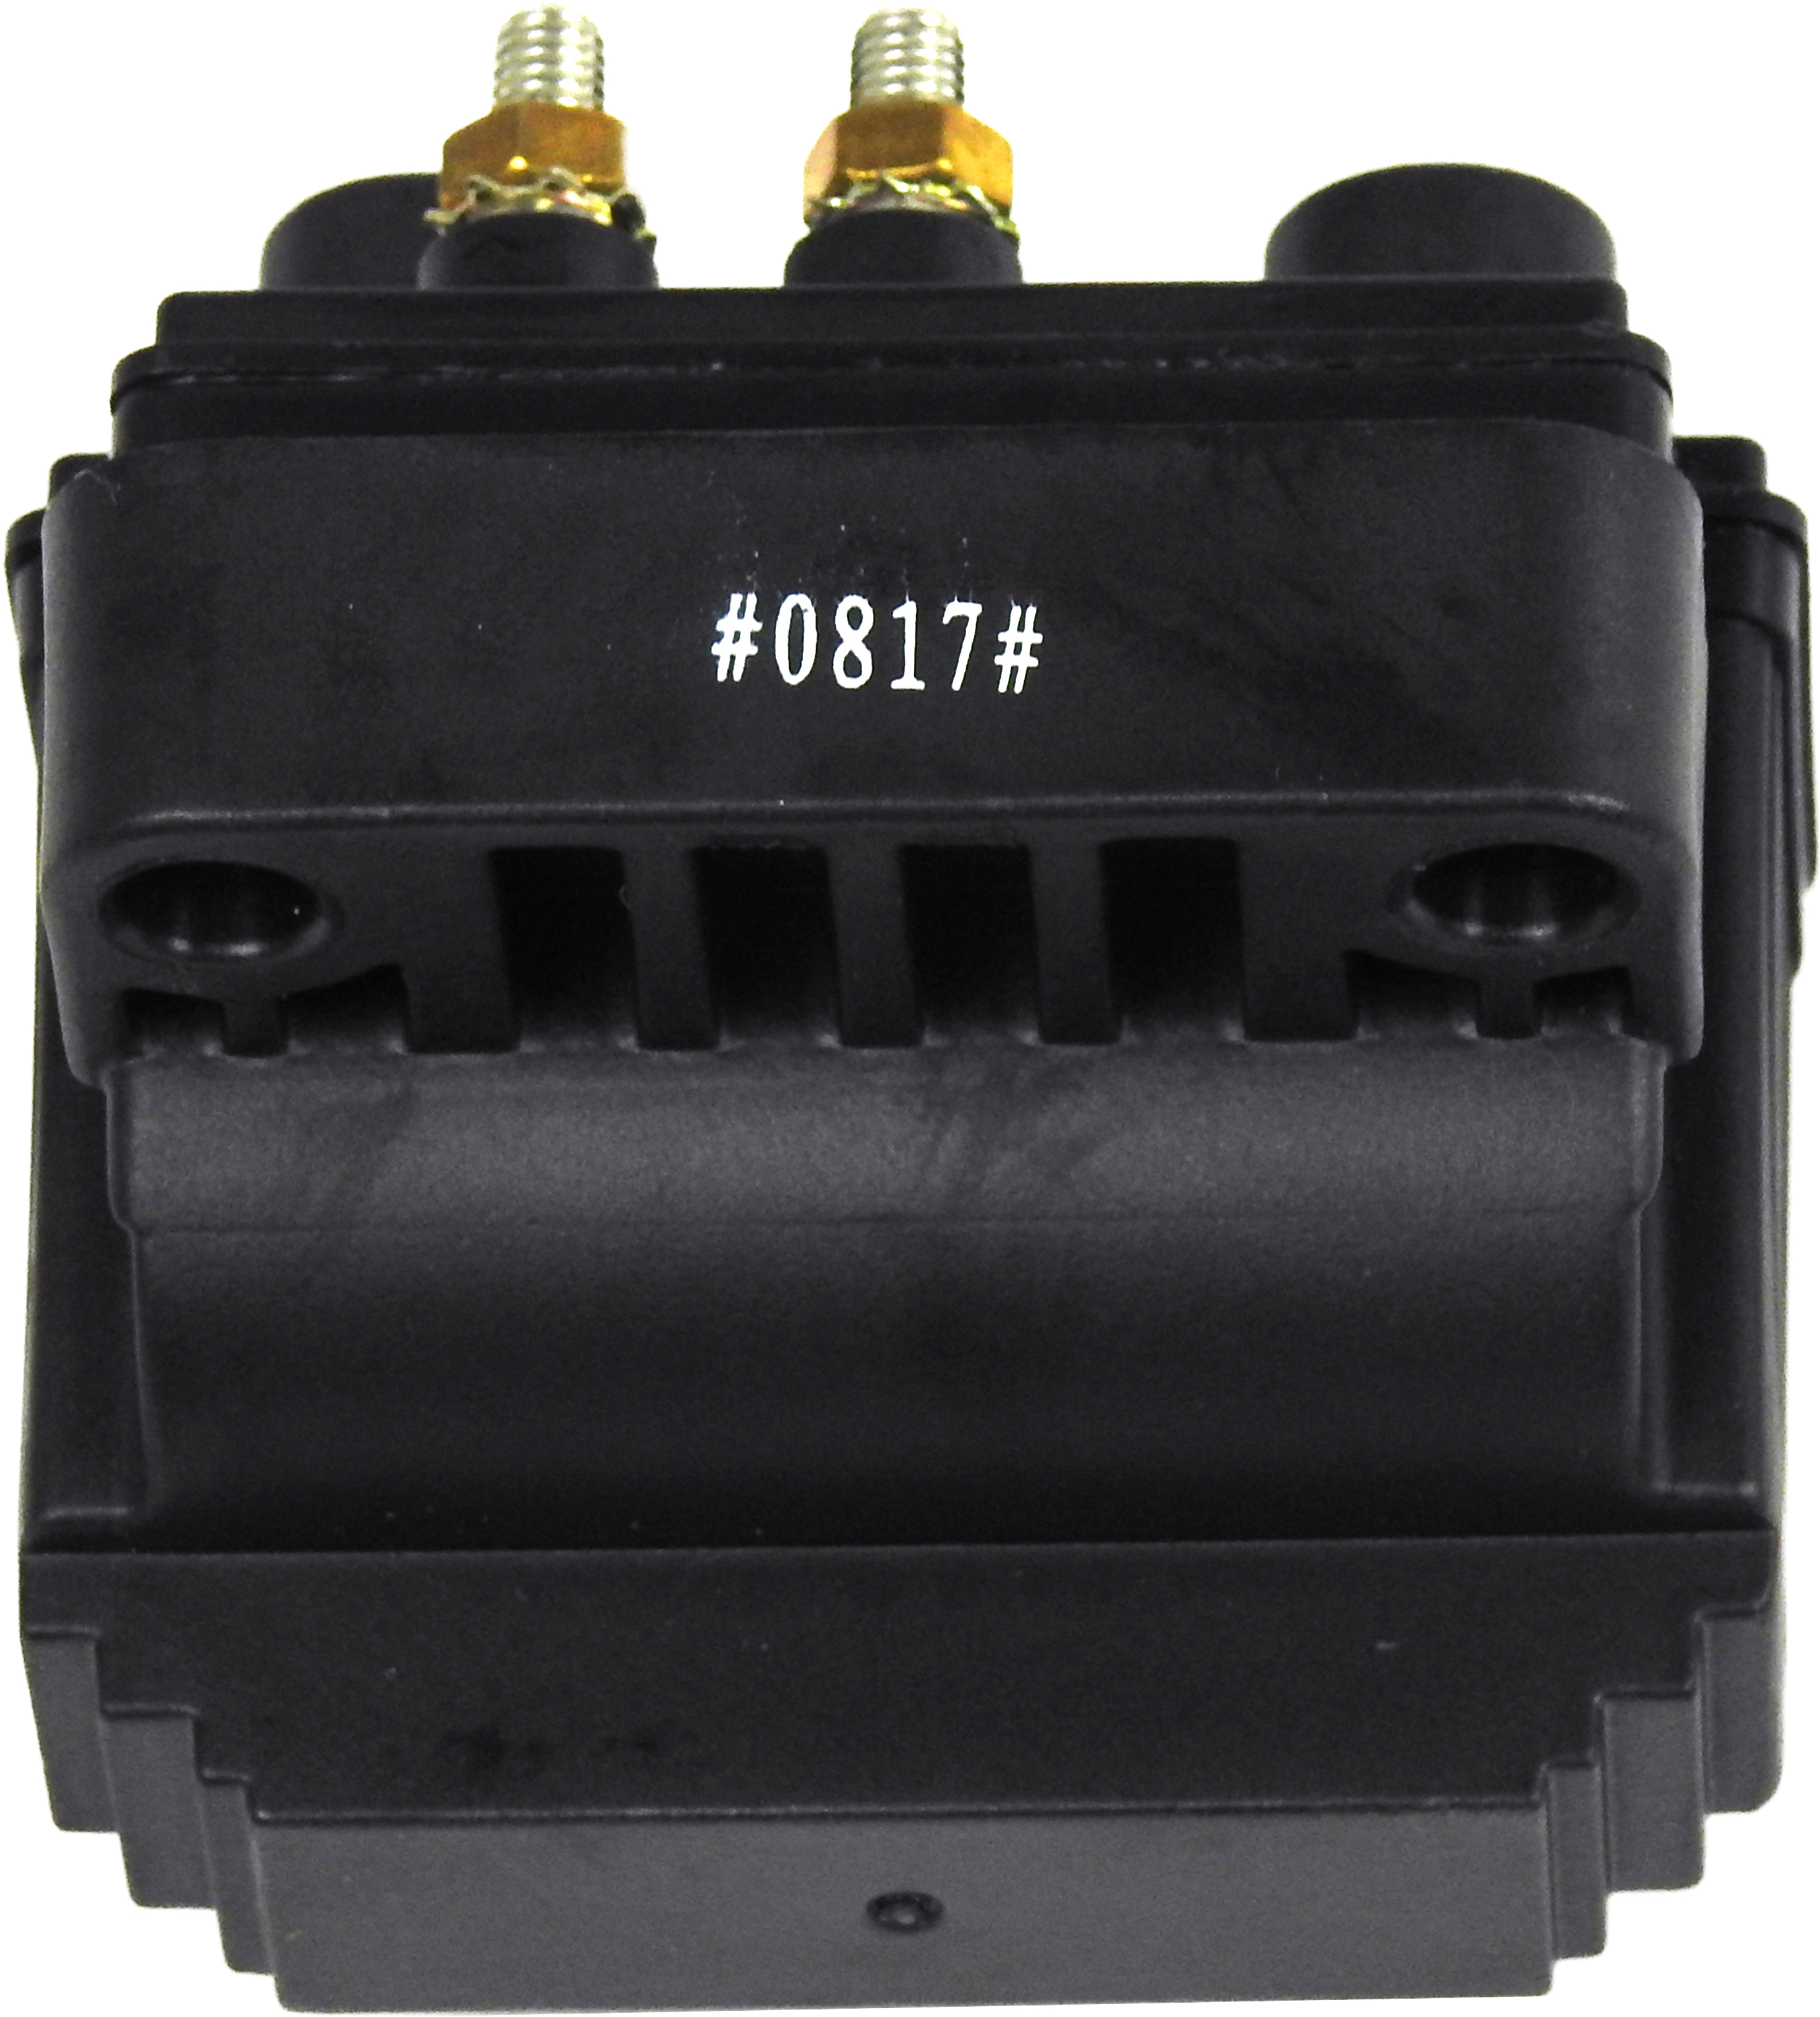 External Dual Fire Ignition Coil 3.0 Ohms - Black - Click Image to Close